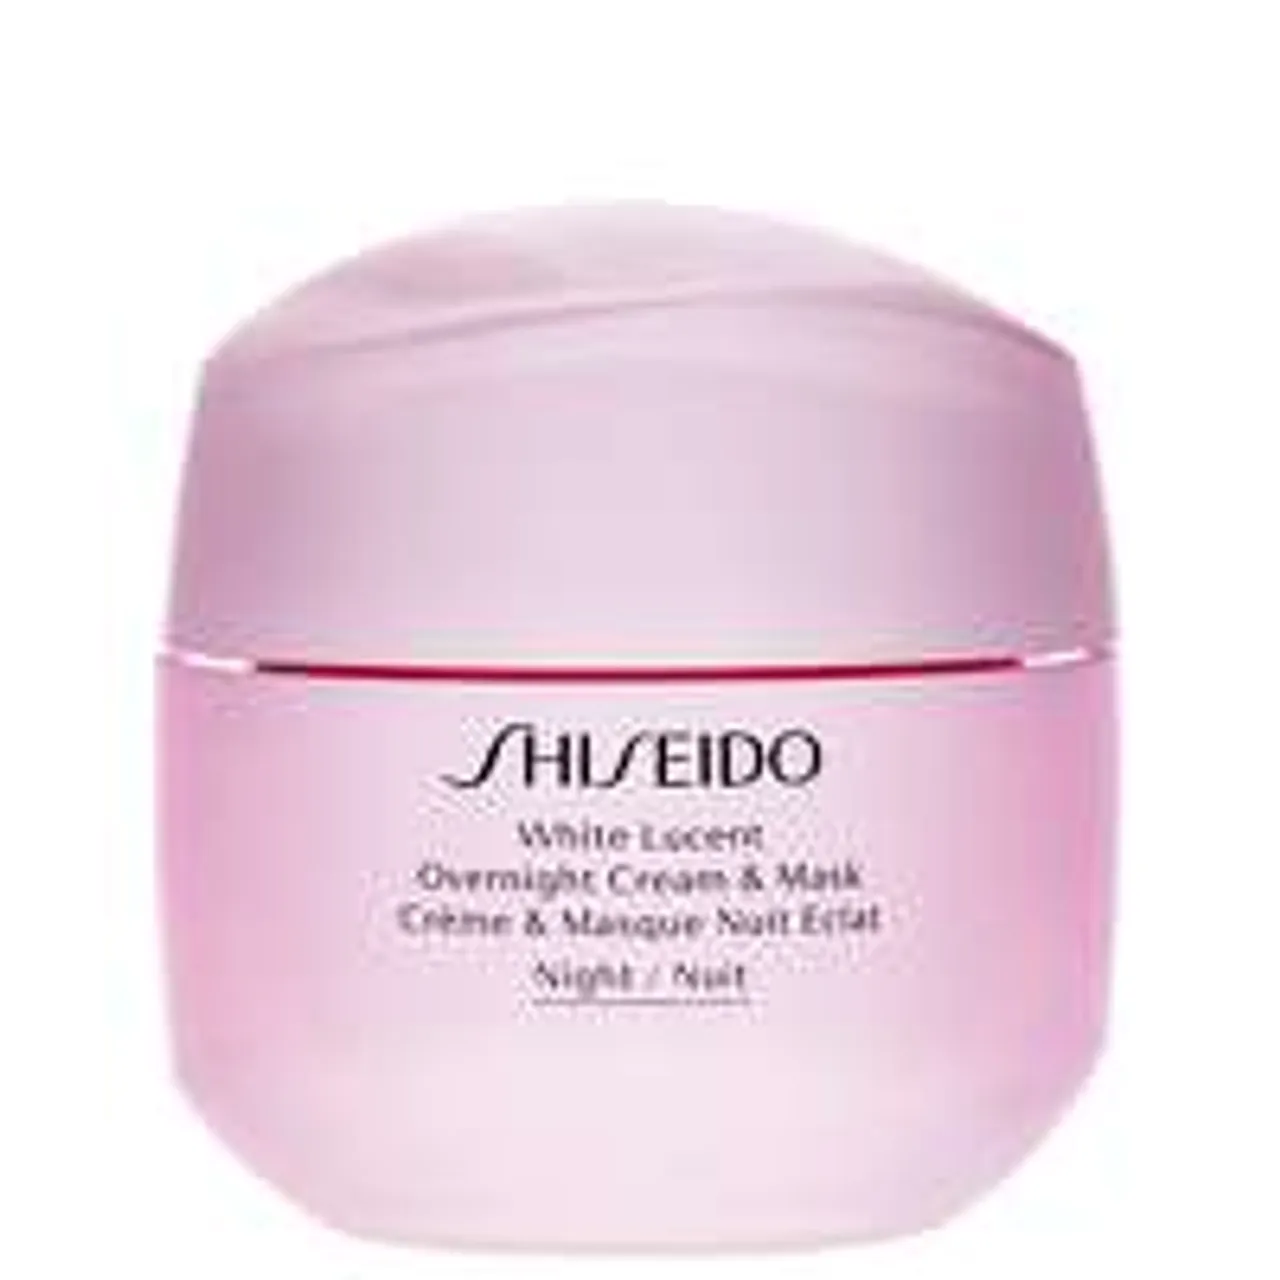 Shiseido Day And Night Creams White Lucent: Overnight Cream and Mask 75ml